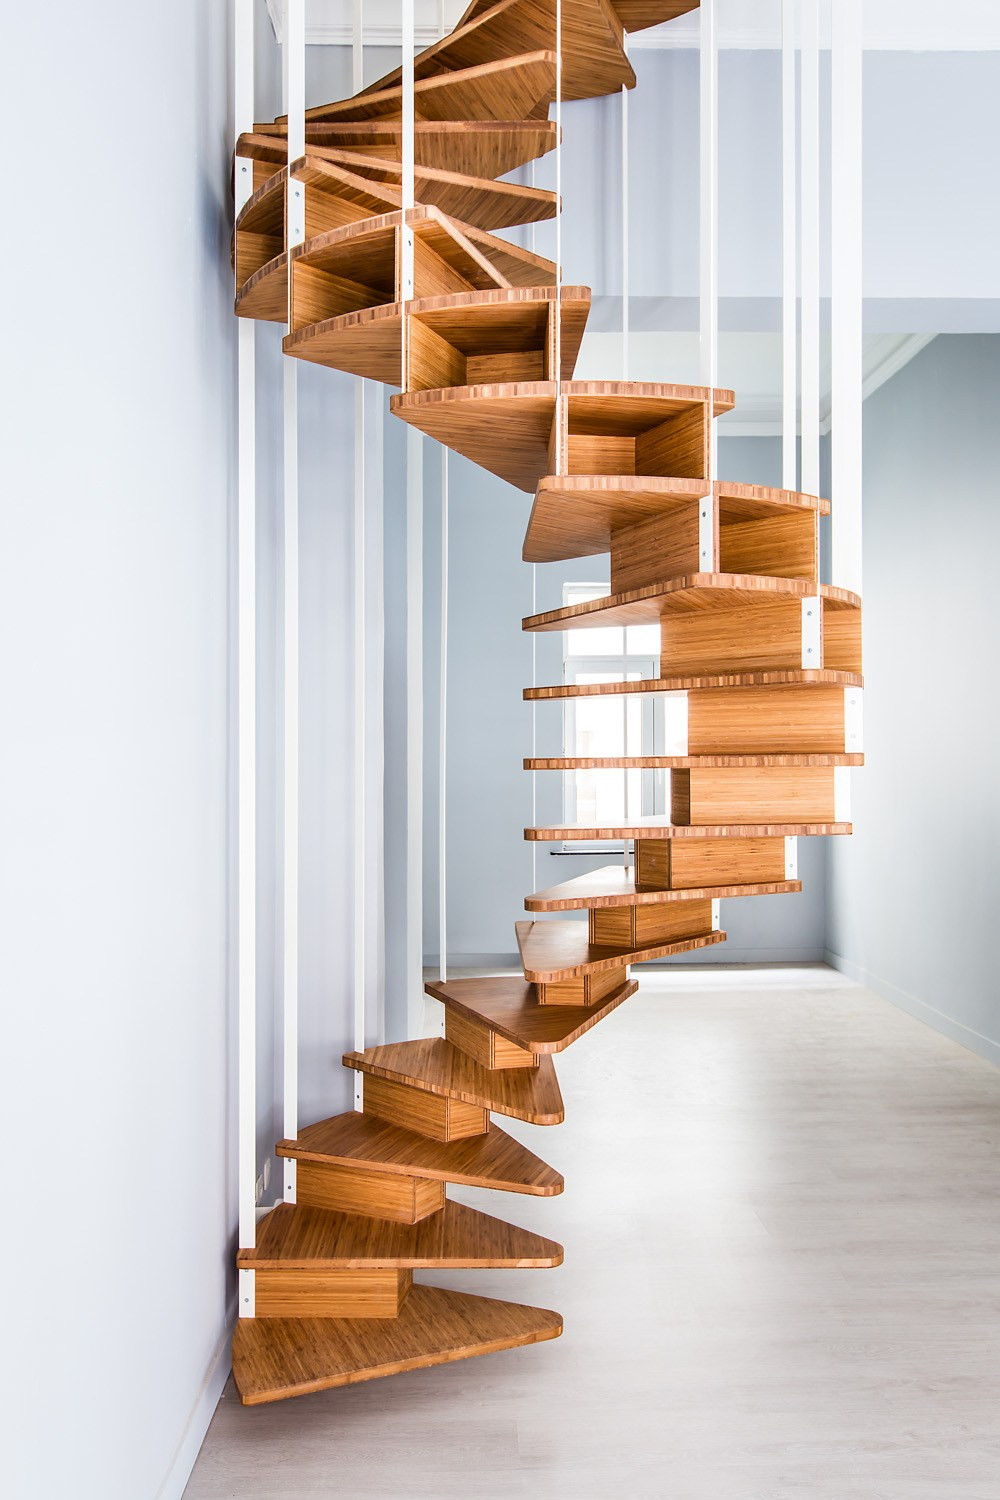 DIY Wood Spiral Staircase
 How to build a wooden spiral staircase My Staircase Gallery